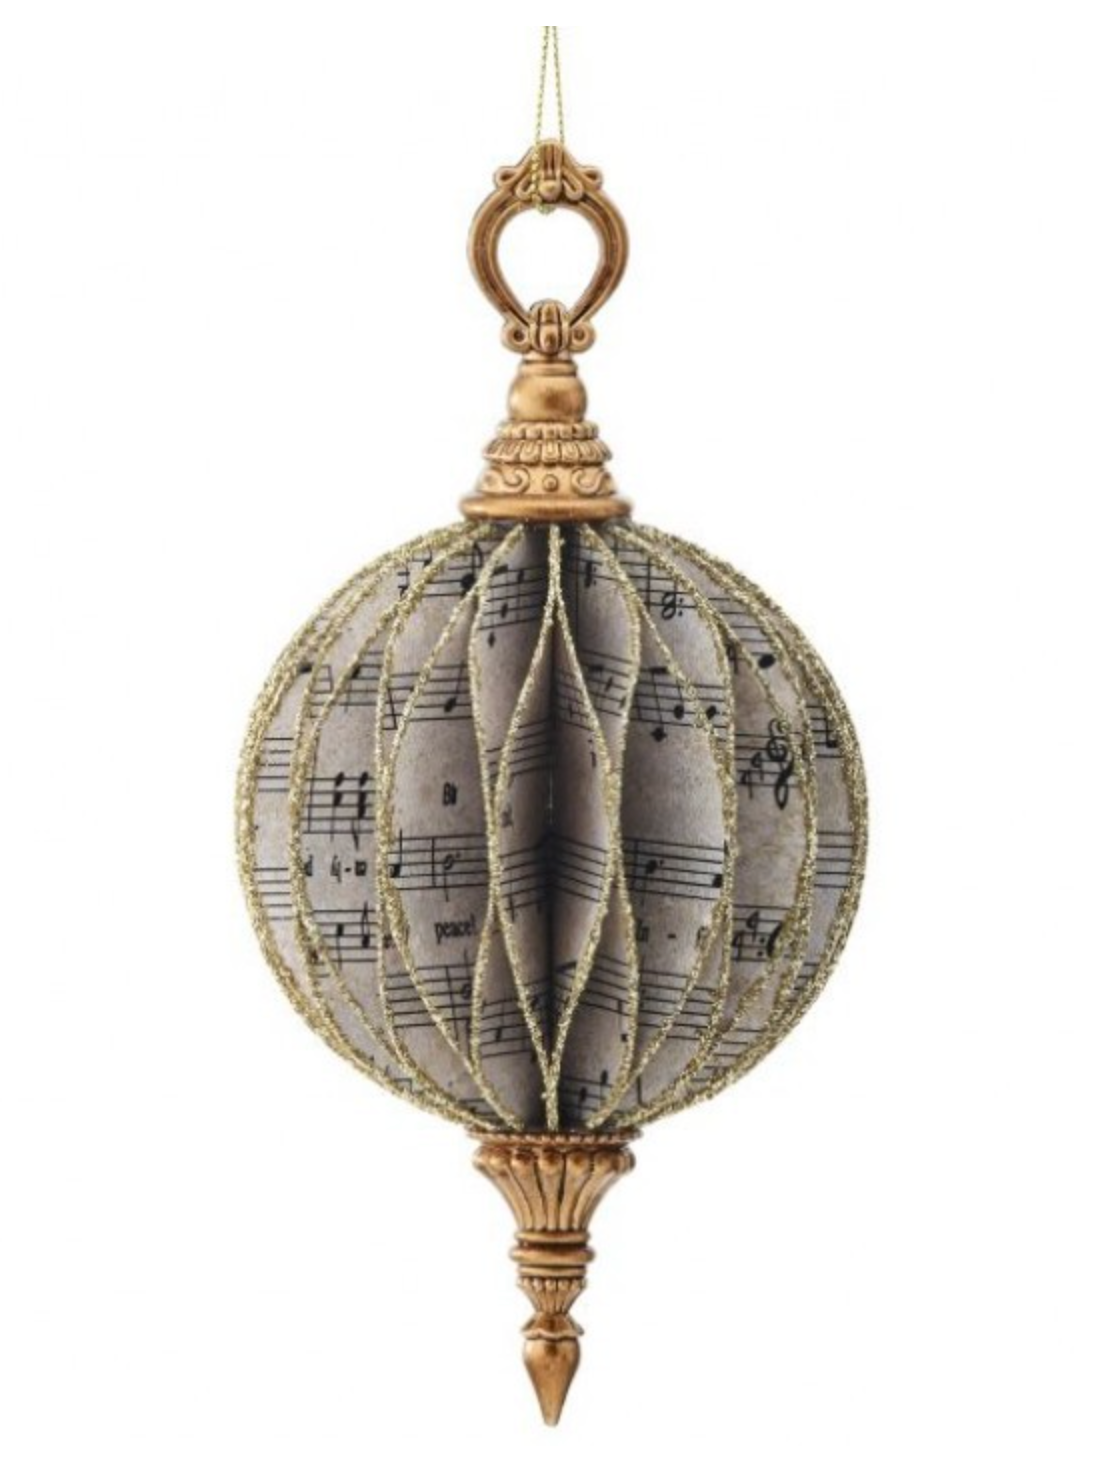 7.75" CARDBOARD MUSIC NOTES FINIAL ORNAMENT